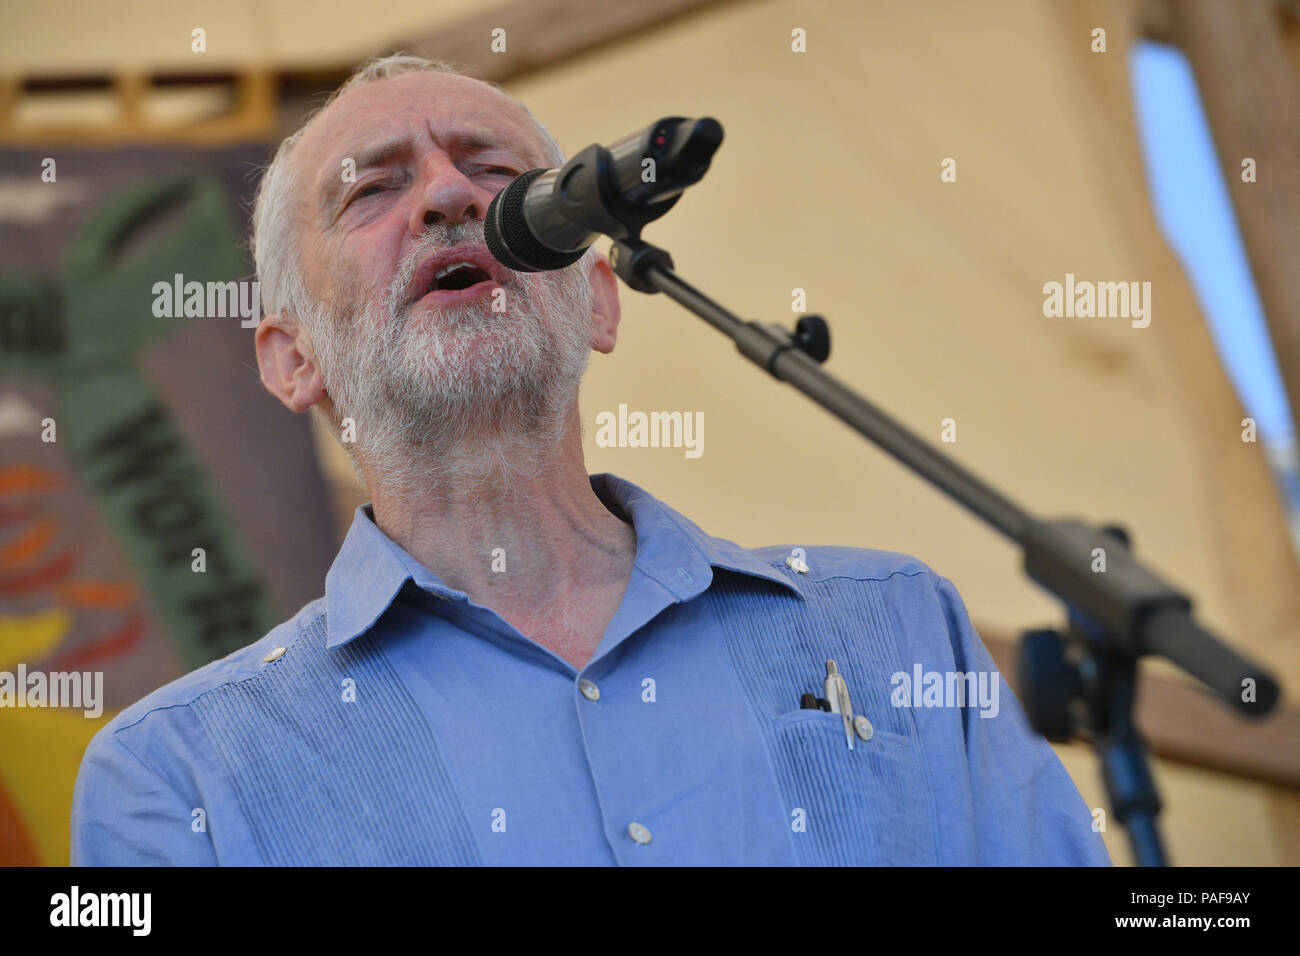 Labour leader Jeremy Corbyn speaking at the Tolpuddle Martyrs Festival in Tolpuddle, Dorset. Stock Photo